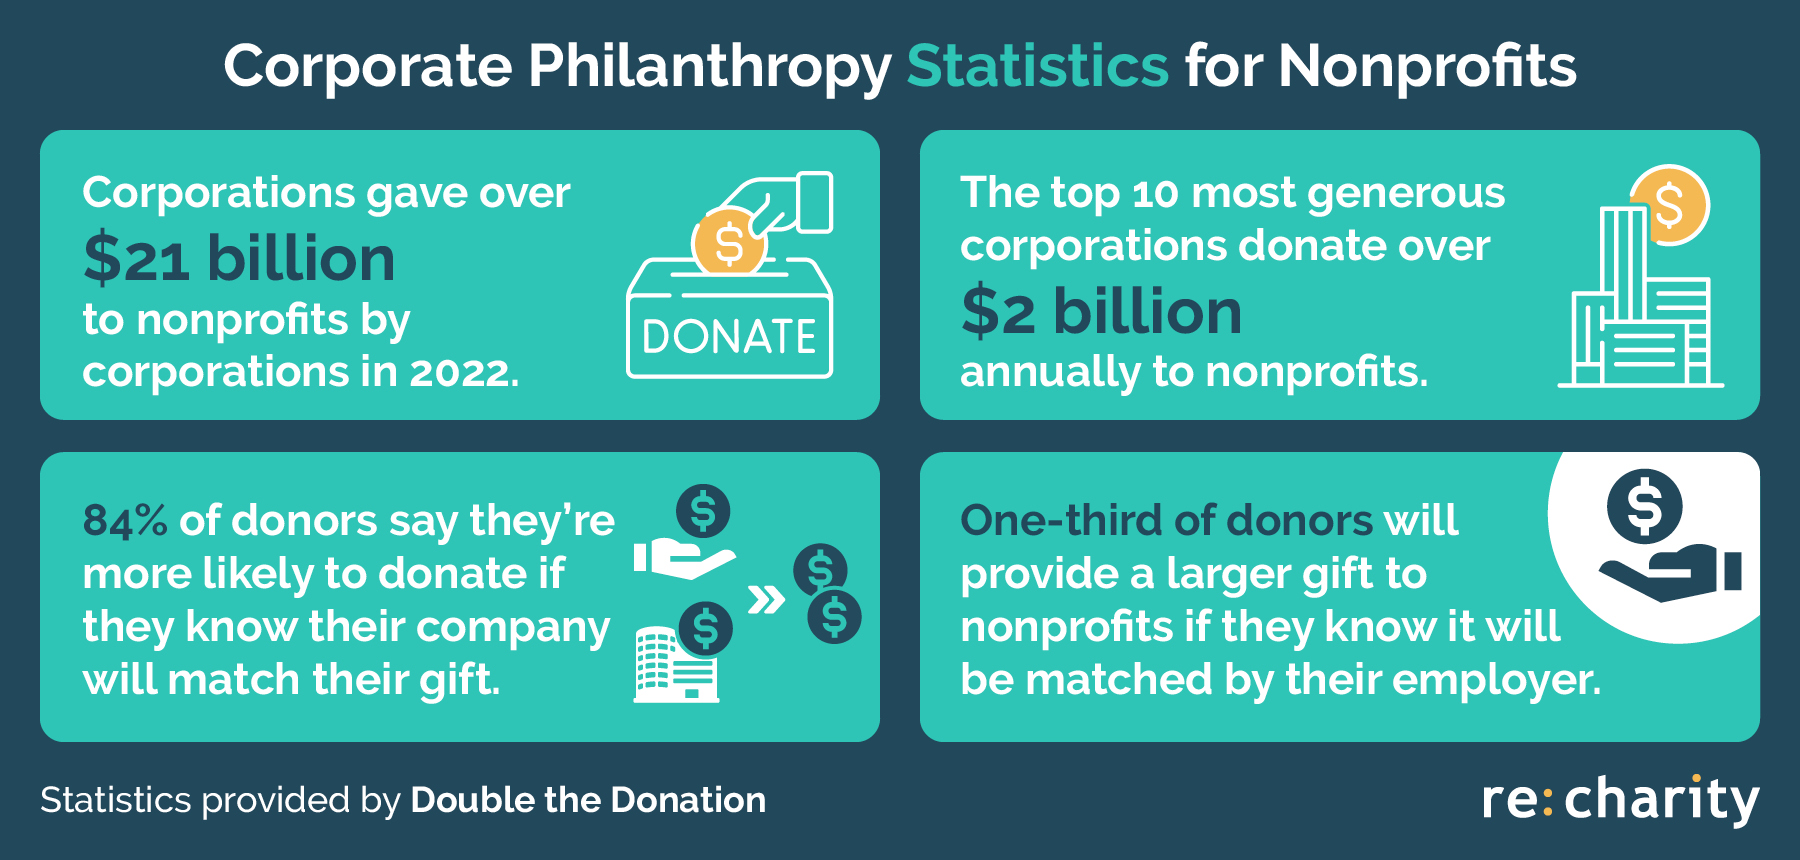 This image describes the potential nonprofit benefits of corporate philanthropy.